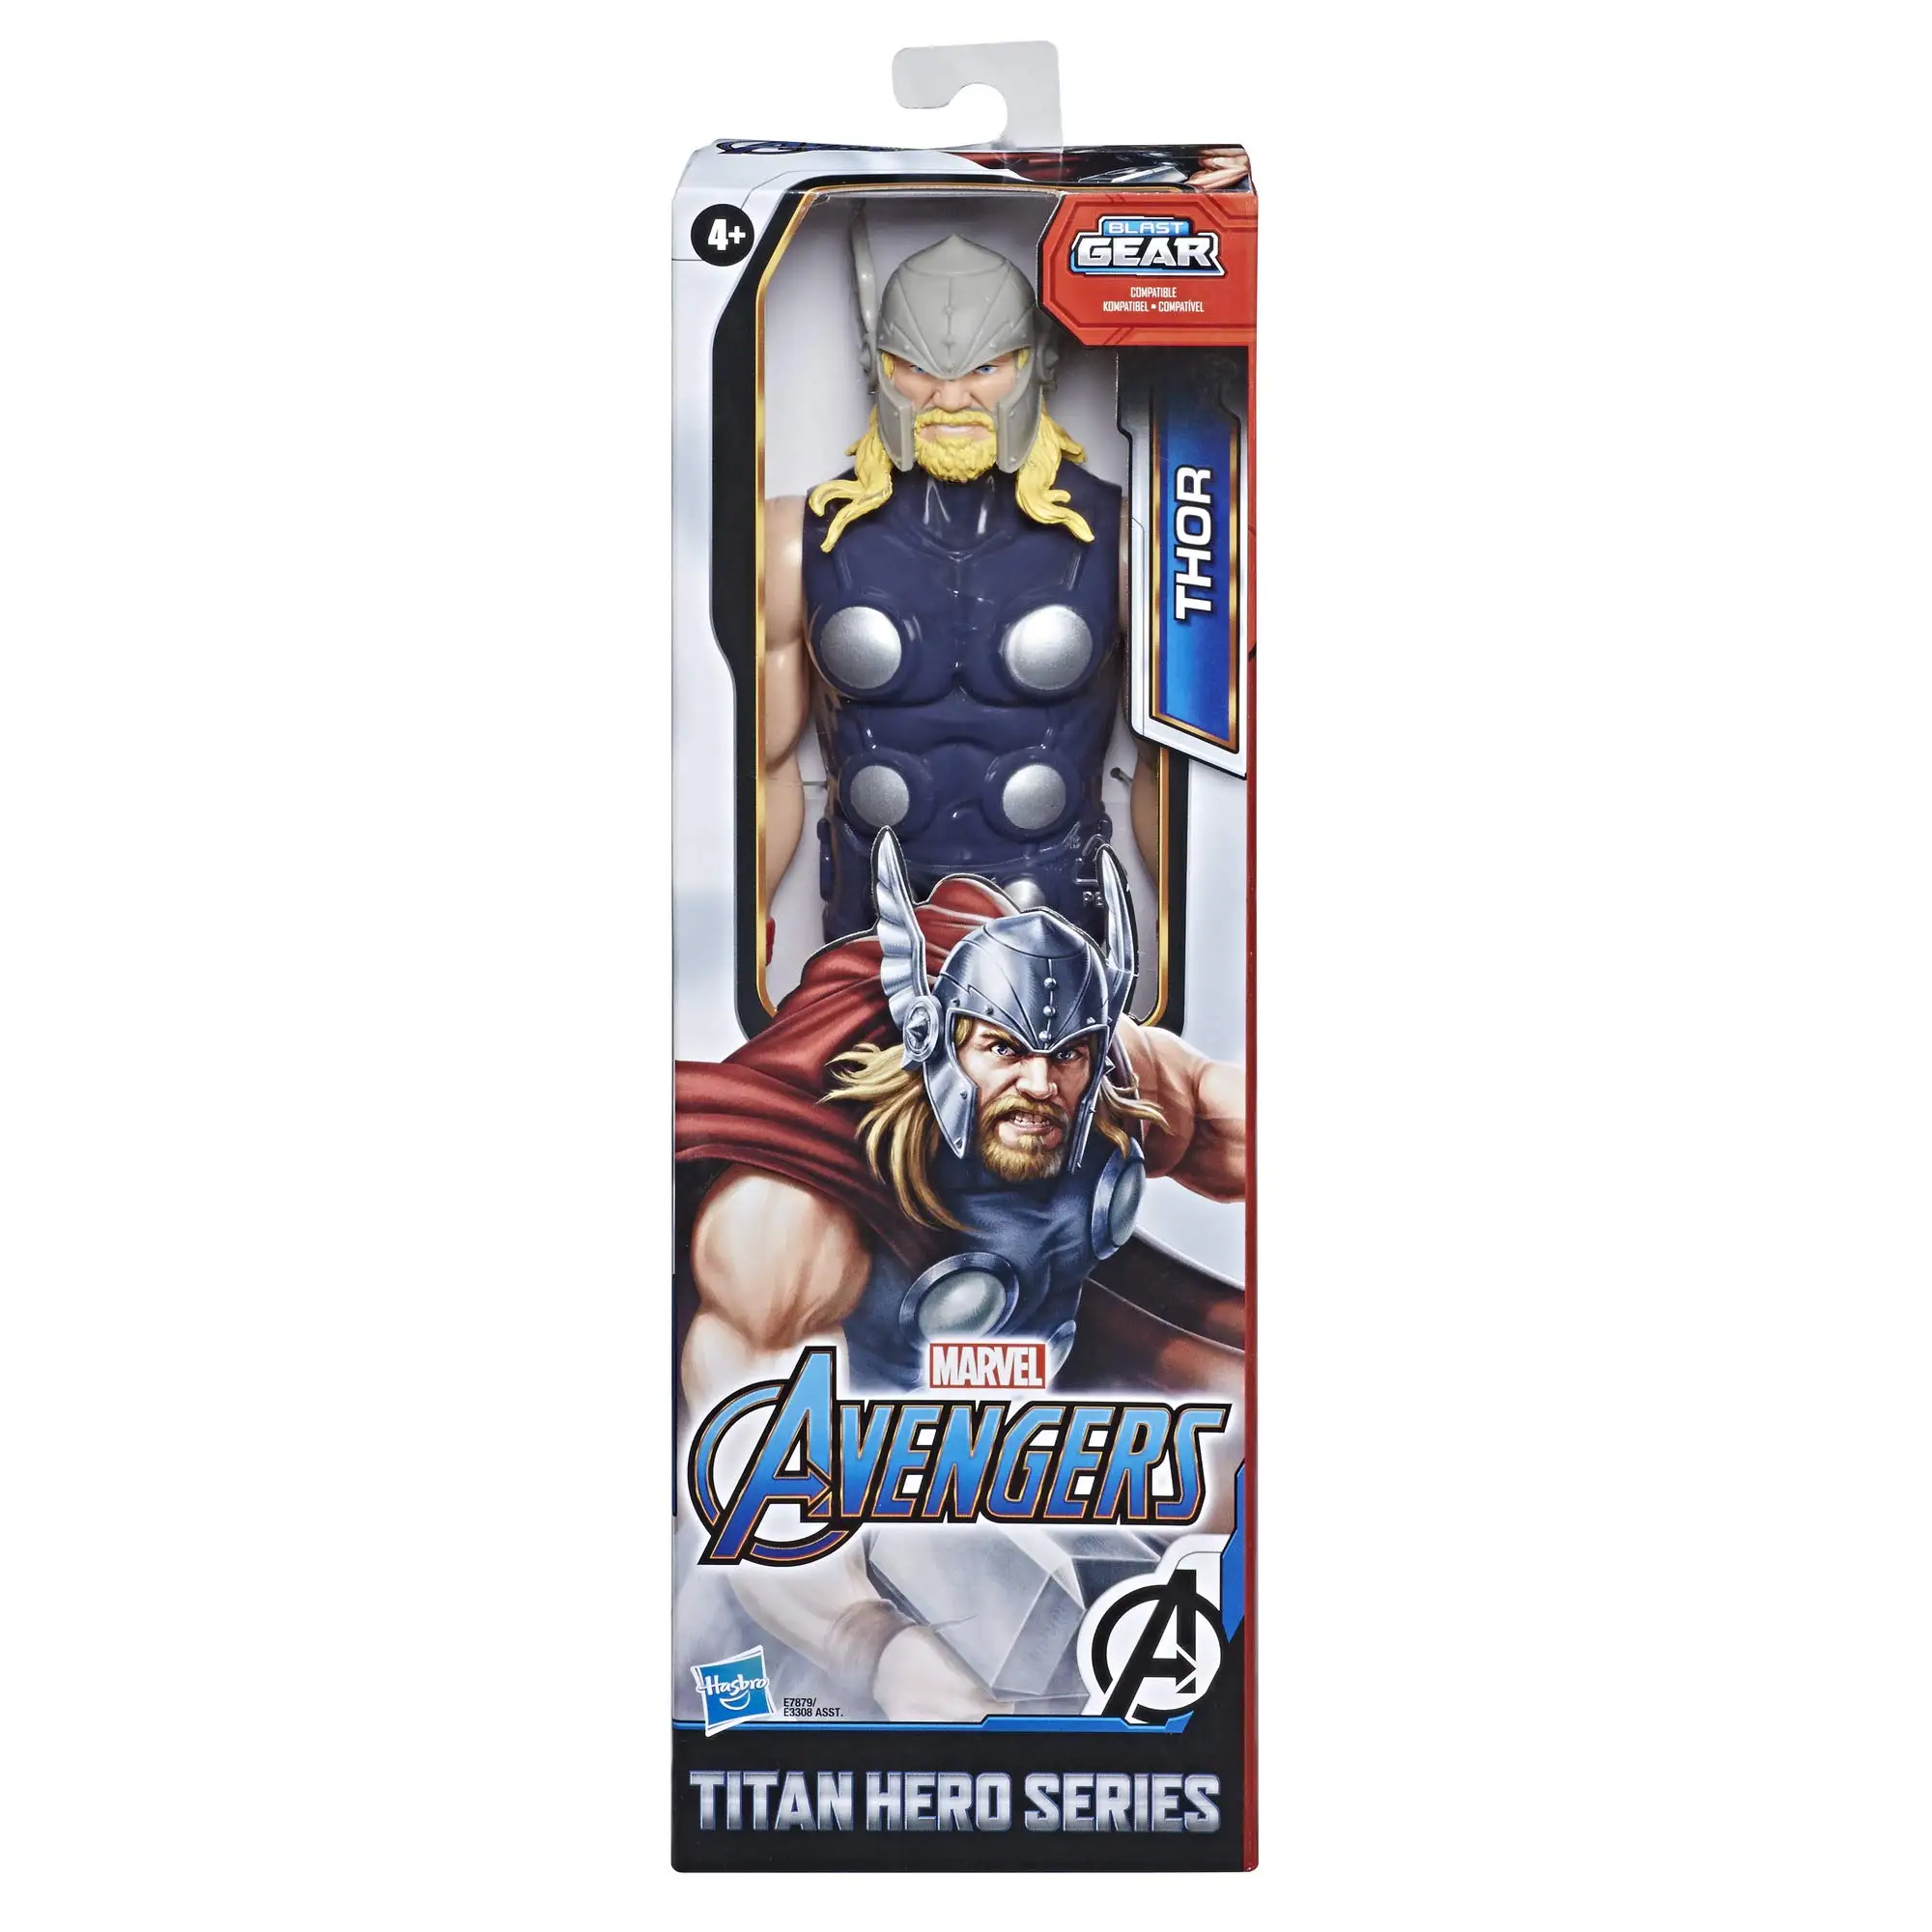 

Hasbro Avengers Marvel Titan Hero Series Blast Gear Thor Action Figure, 12" Toy, Inspired by The Marvel Universe, for Kids E7879